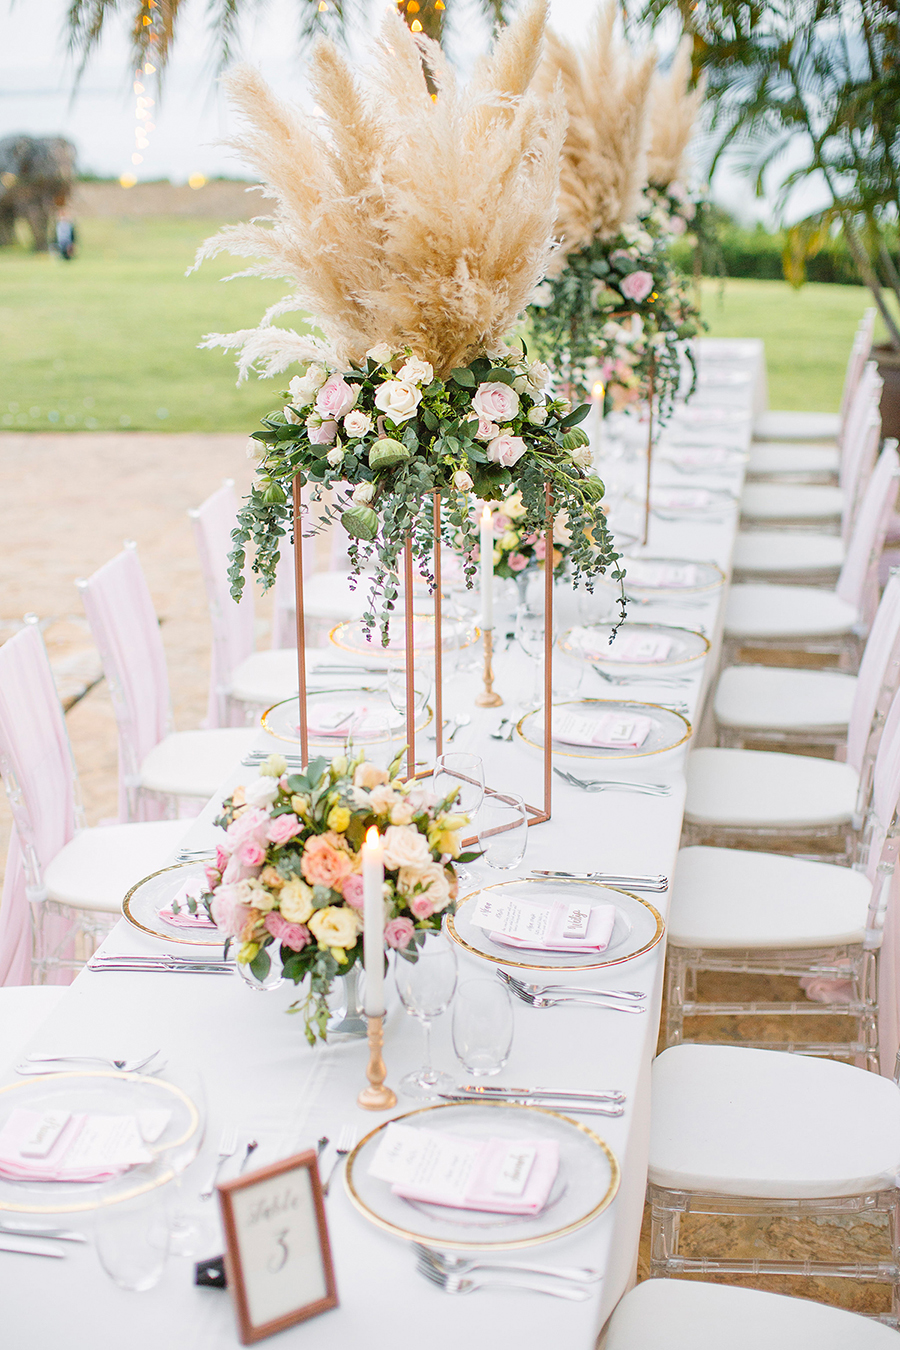 White wedding table with blush and copper accents and tall pampas grass and greeneries centerpiece